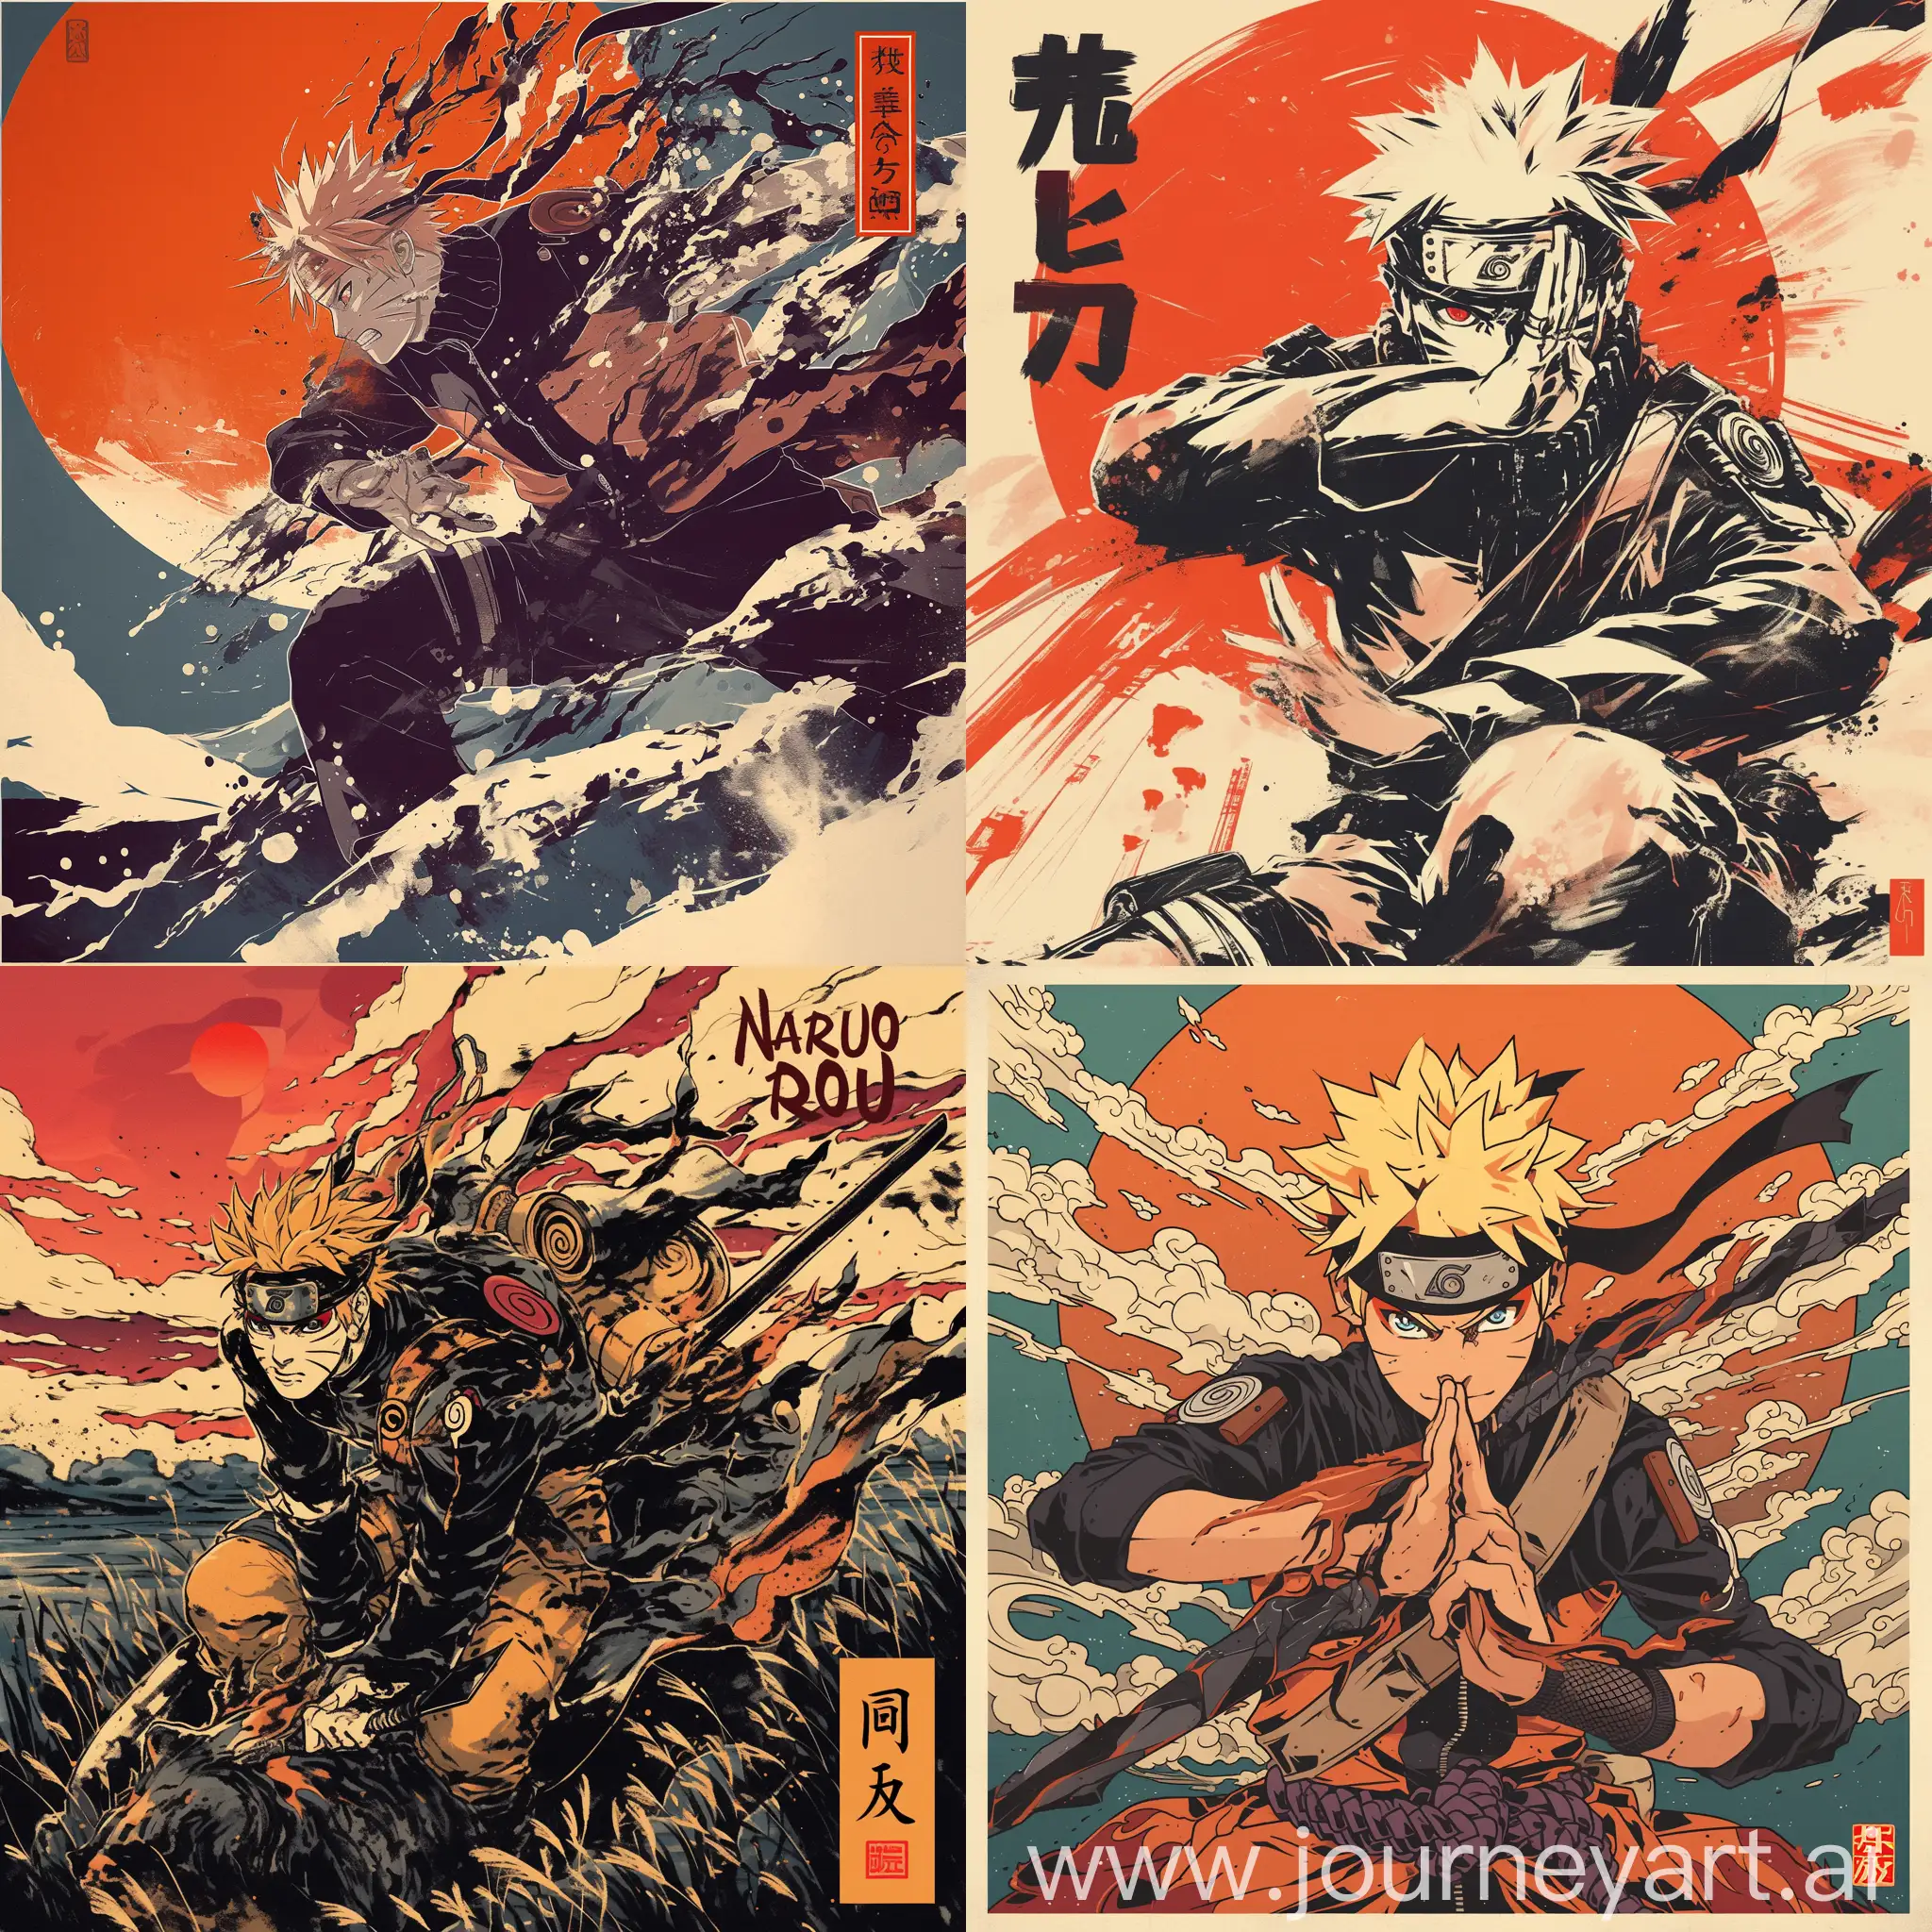 Naruto-Sumie-Ink-Poster-Meticulously-Detailed-Heroic-Masculinity